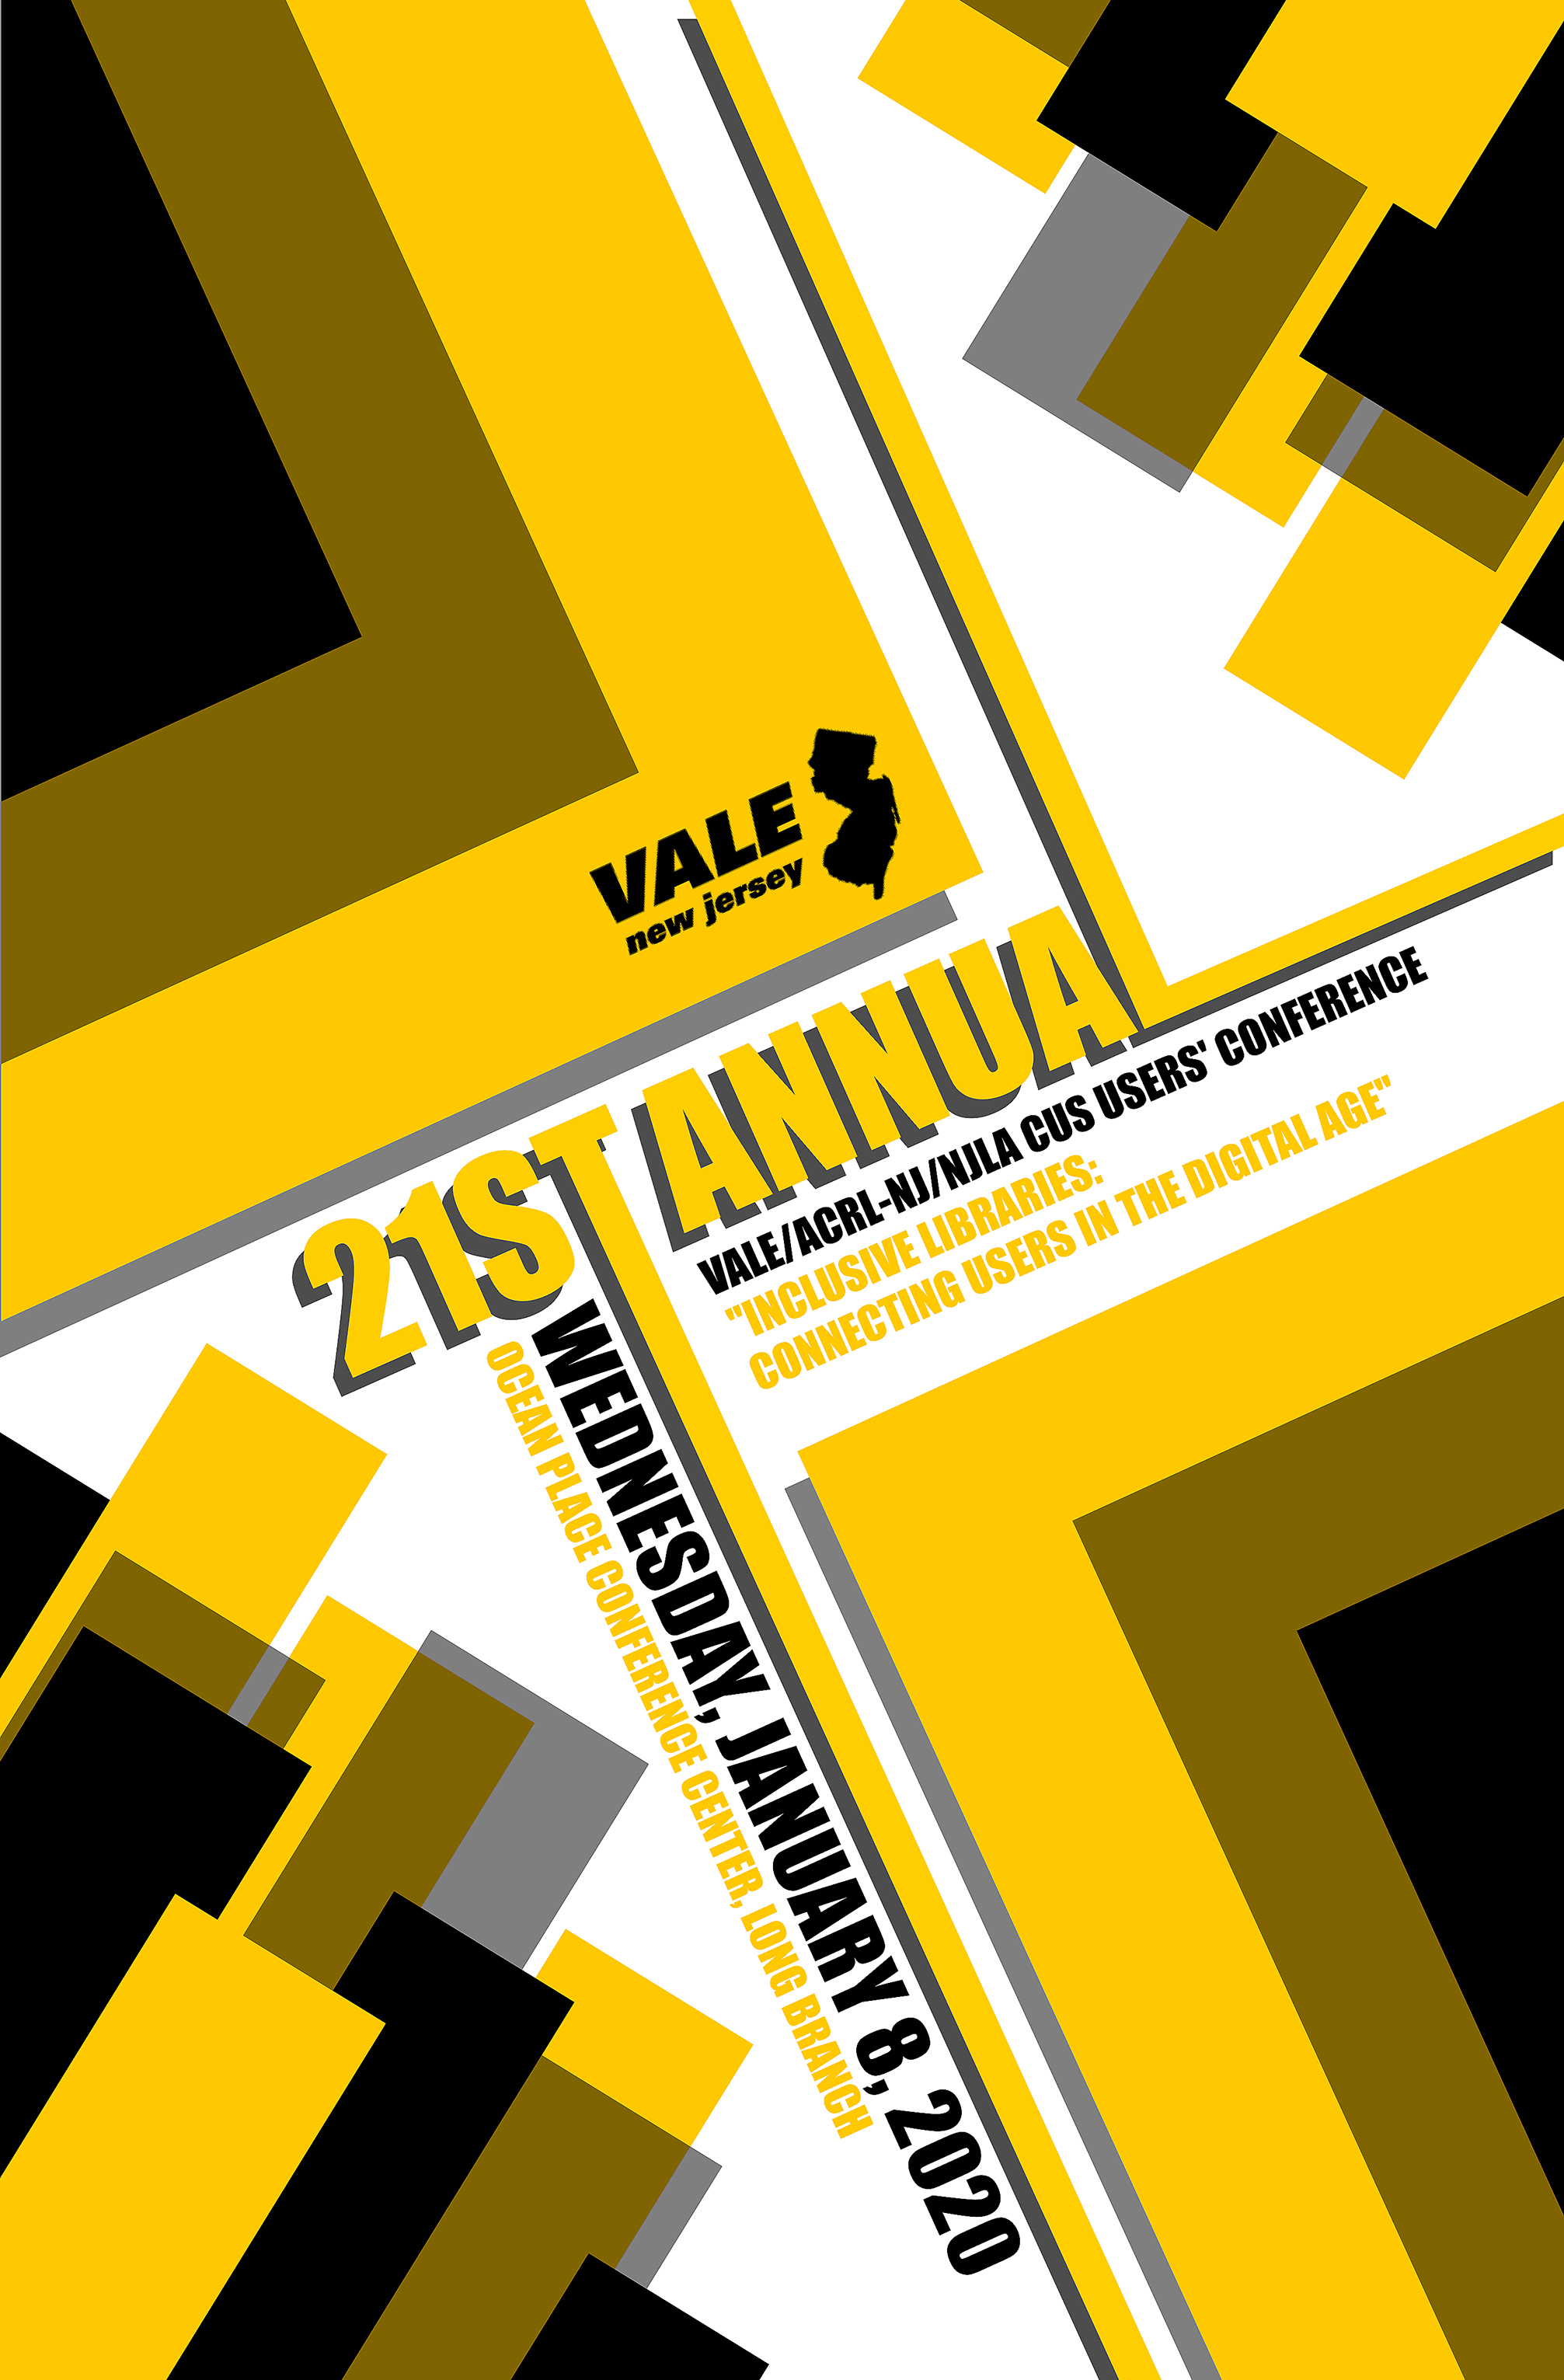 Cover design of the organization’s 21st annual conference brochure